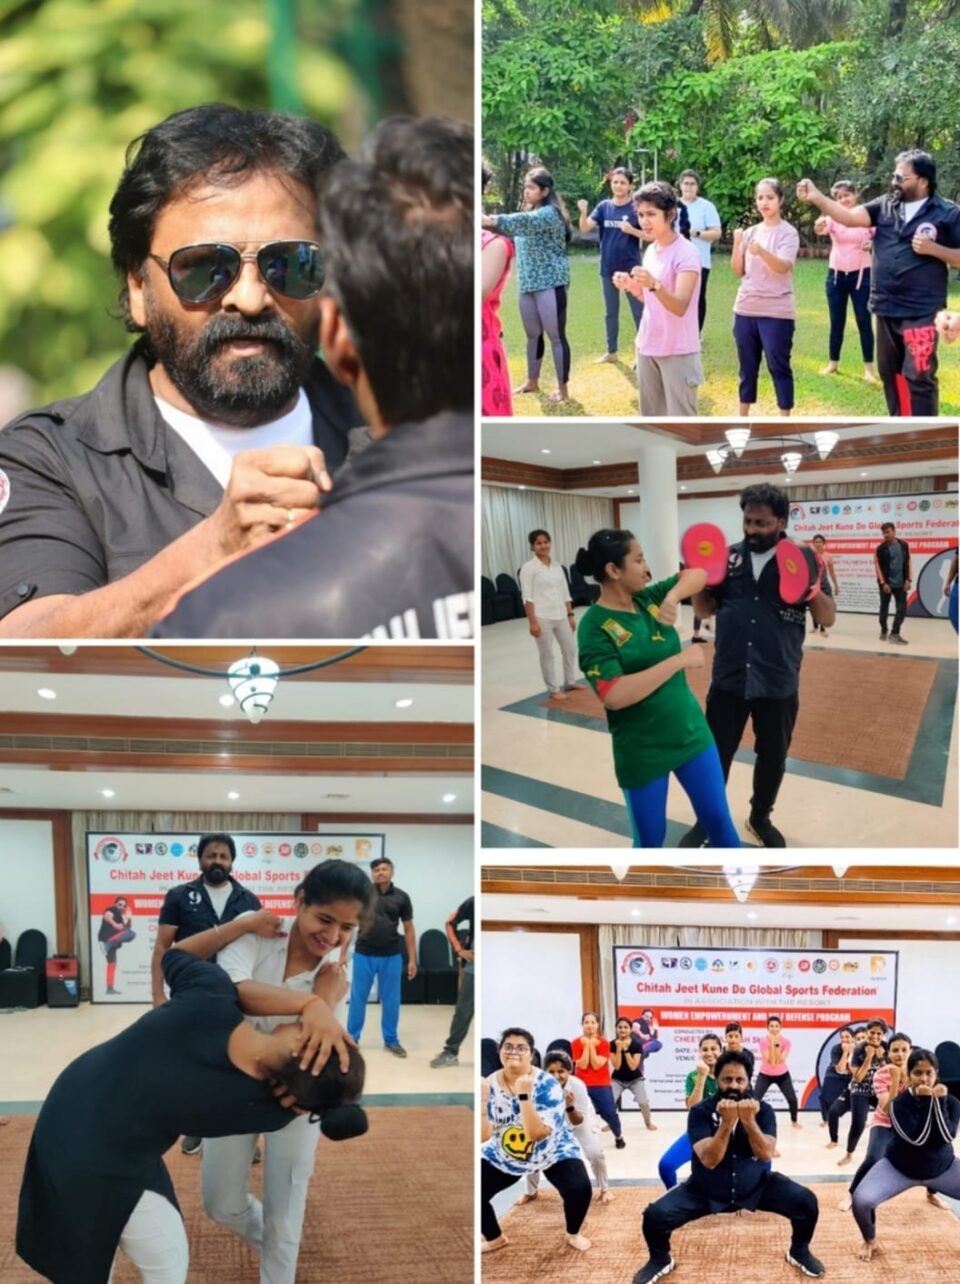 Ace martial artist taught martial arts and self-defense methods as a part of women empowerment initiative by the hotel and his federation